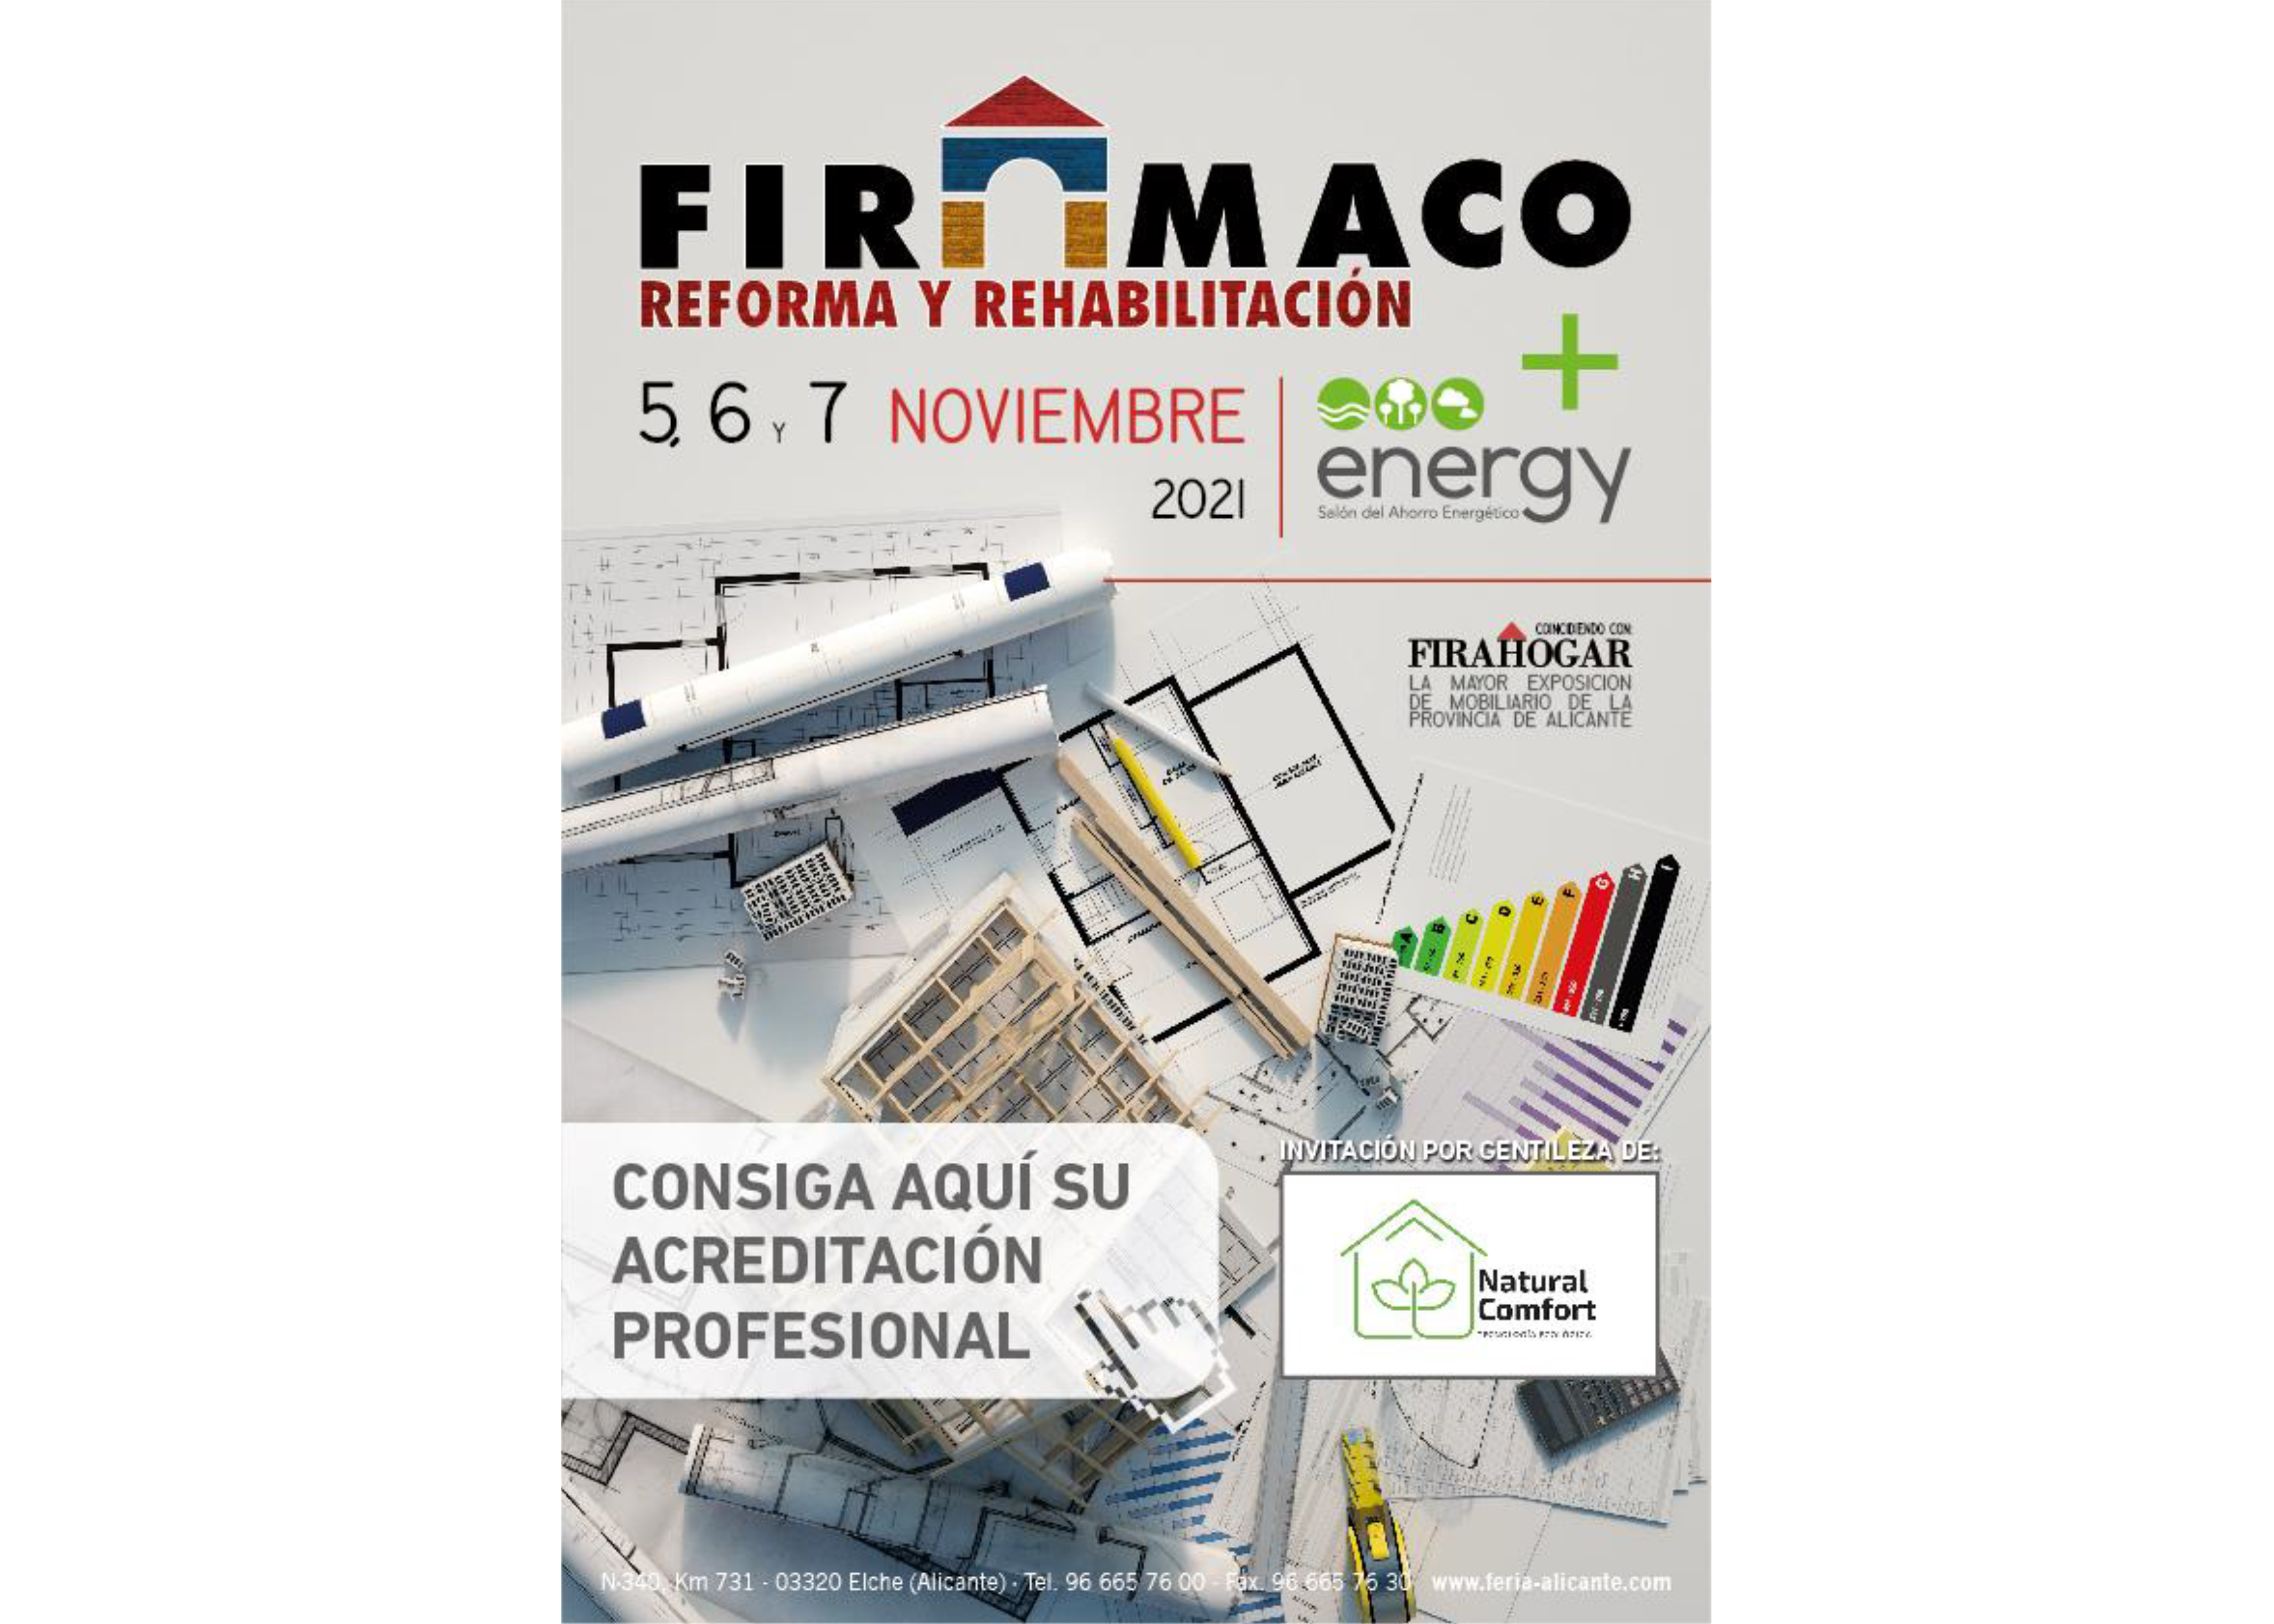 You are currently viewing Natural Comfort at FIRAMACO (IFA Venue)